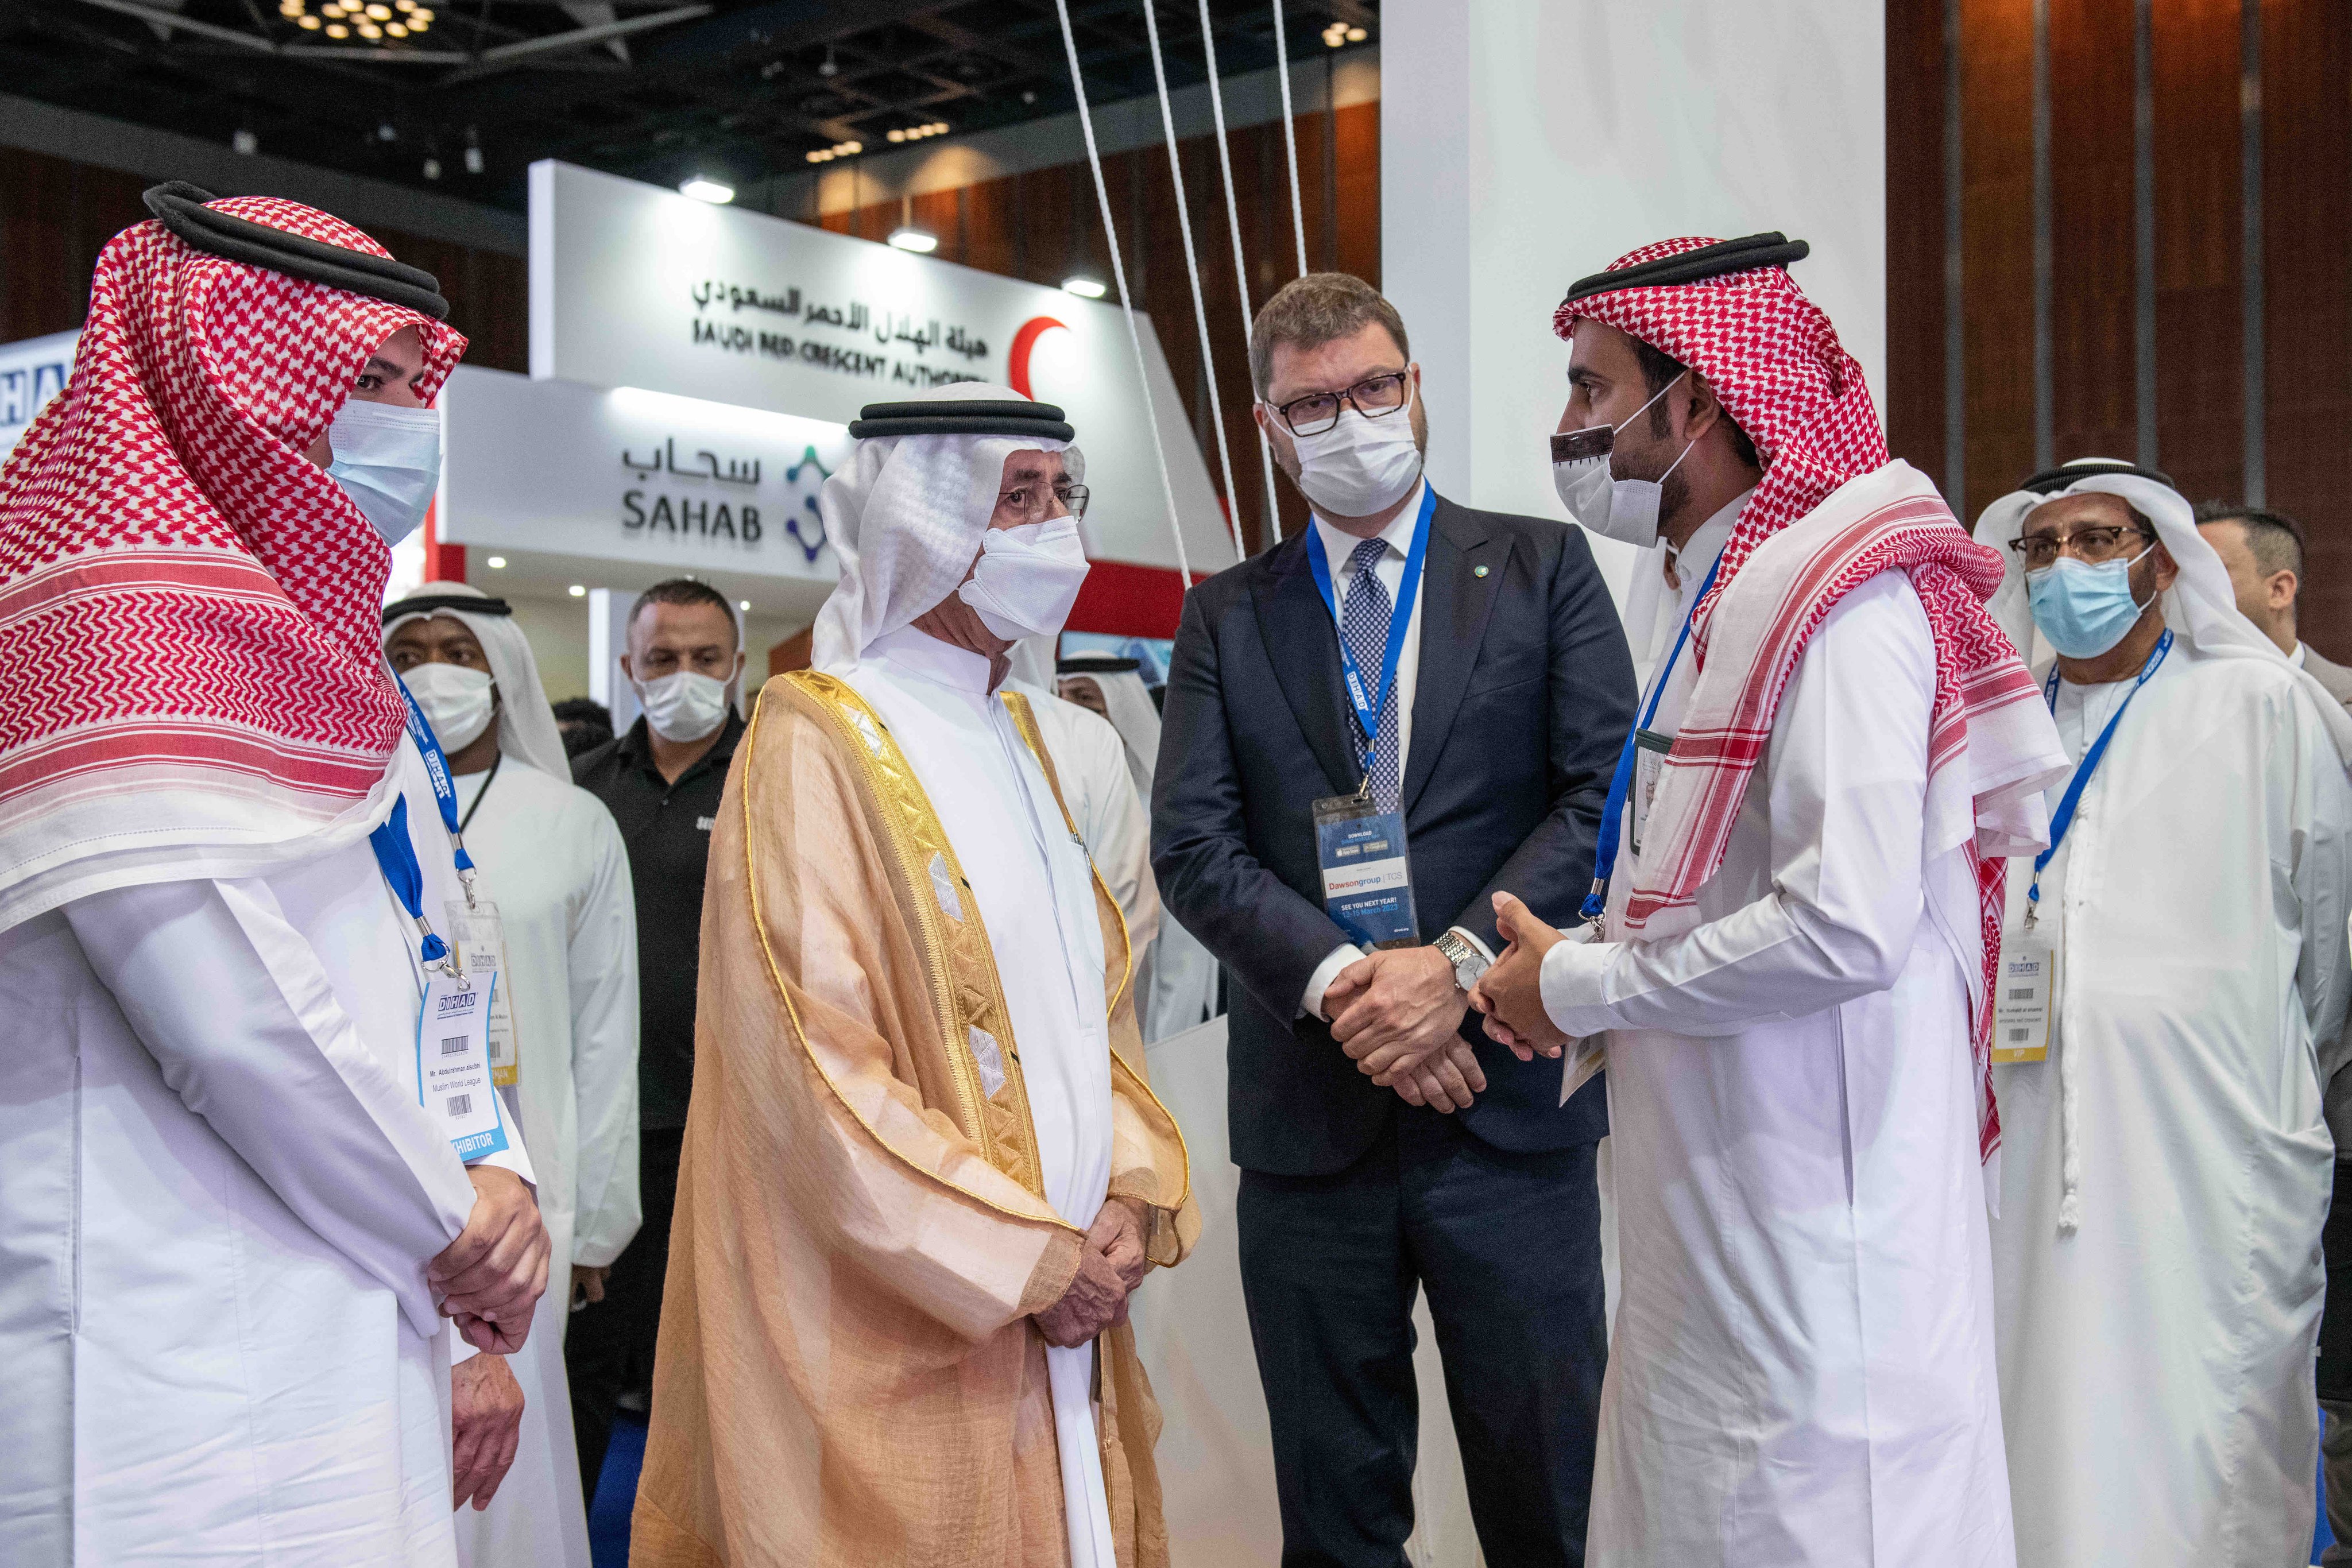 The Muslim World League was a sponsor of the 18th annual Dubai International Aid and Development Exhibition and Conference